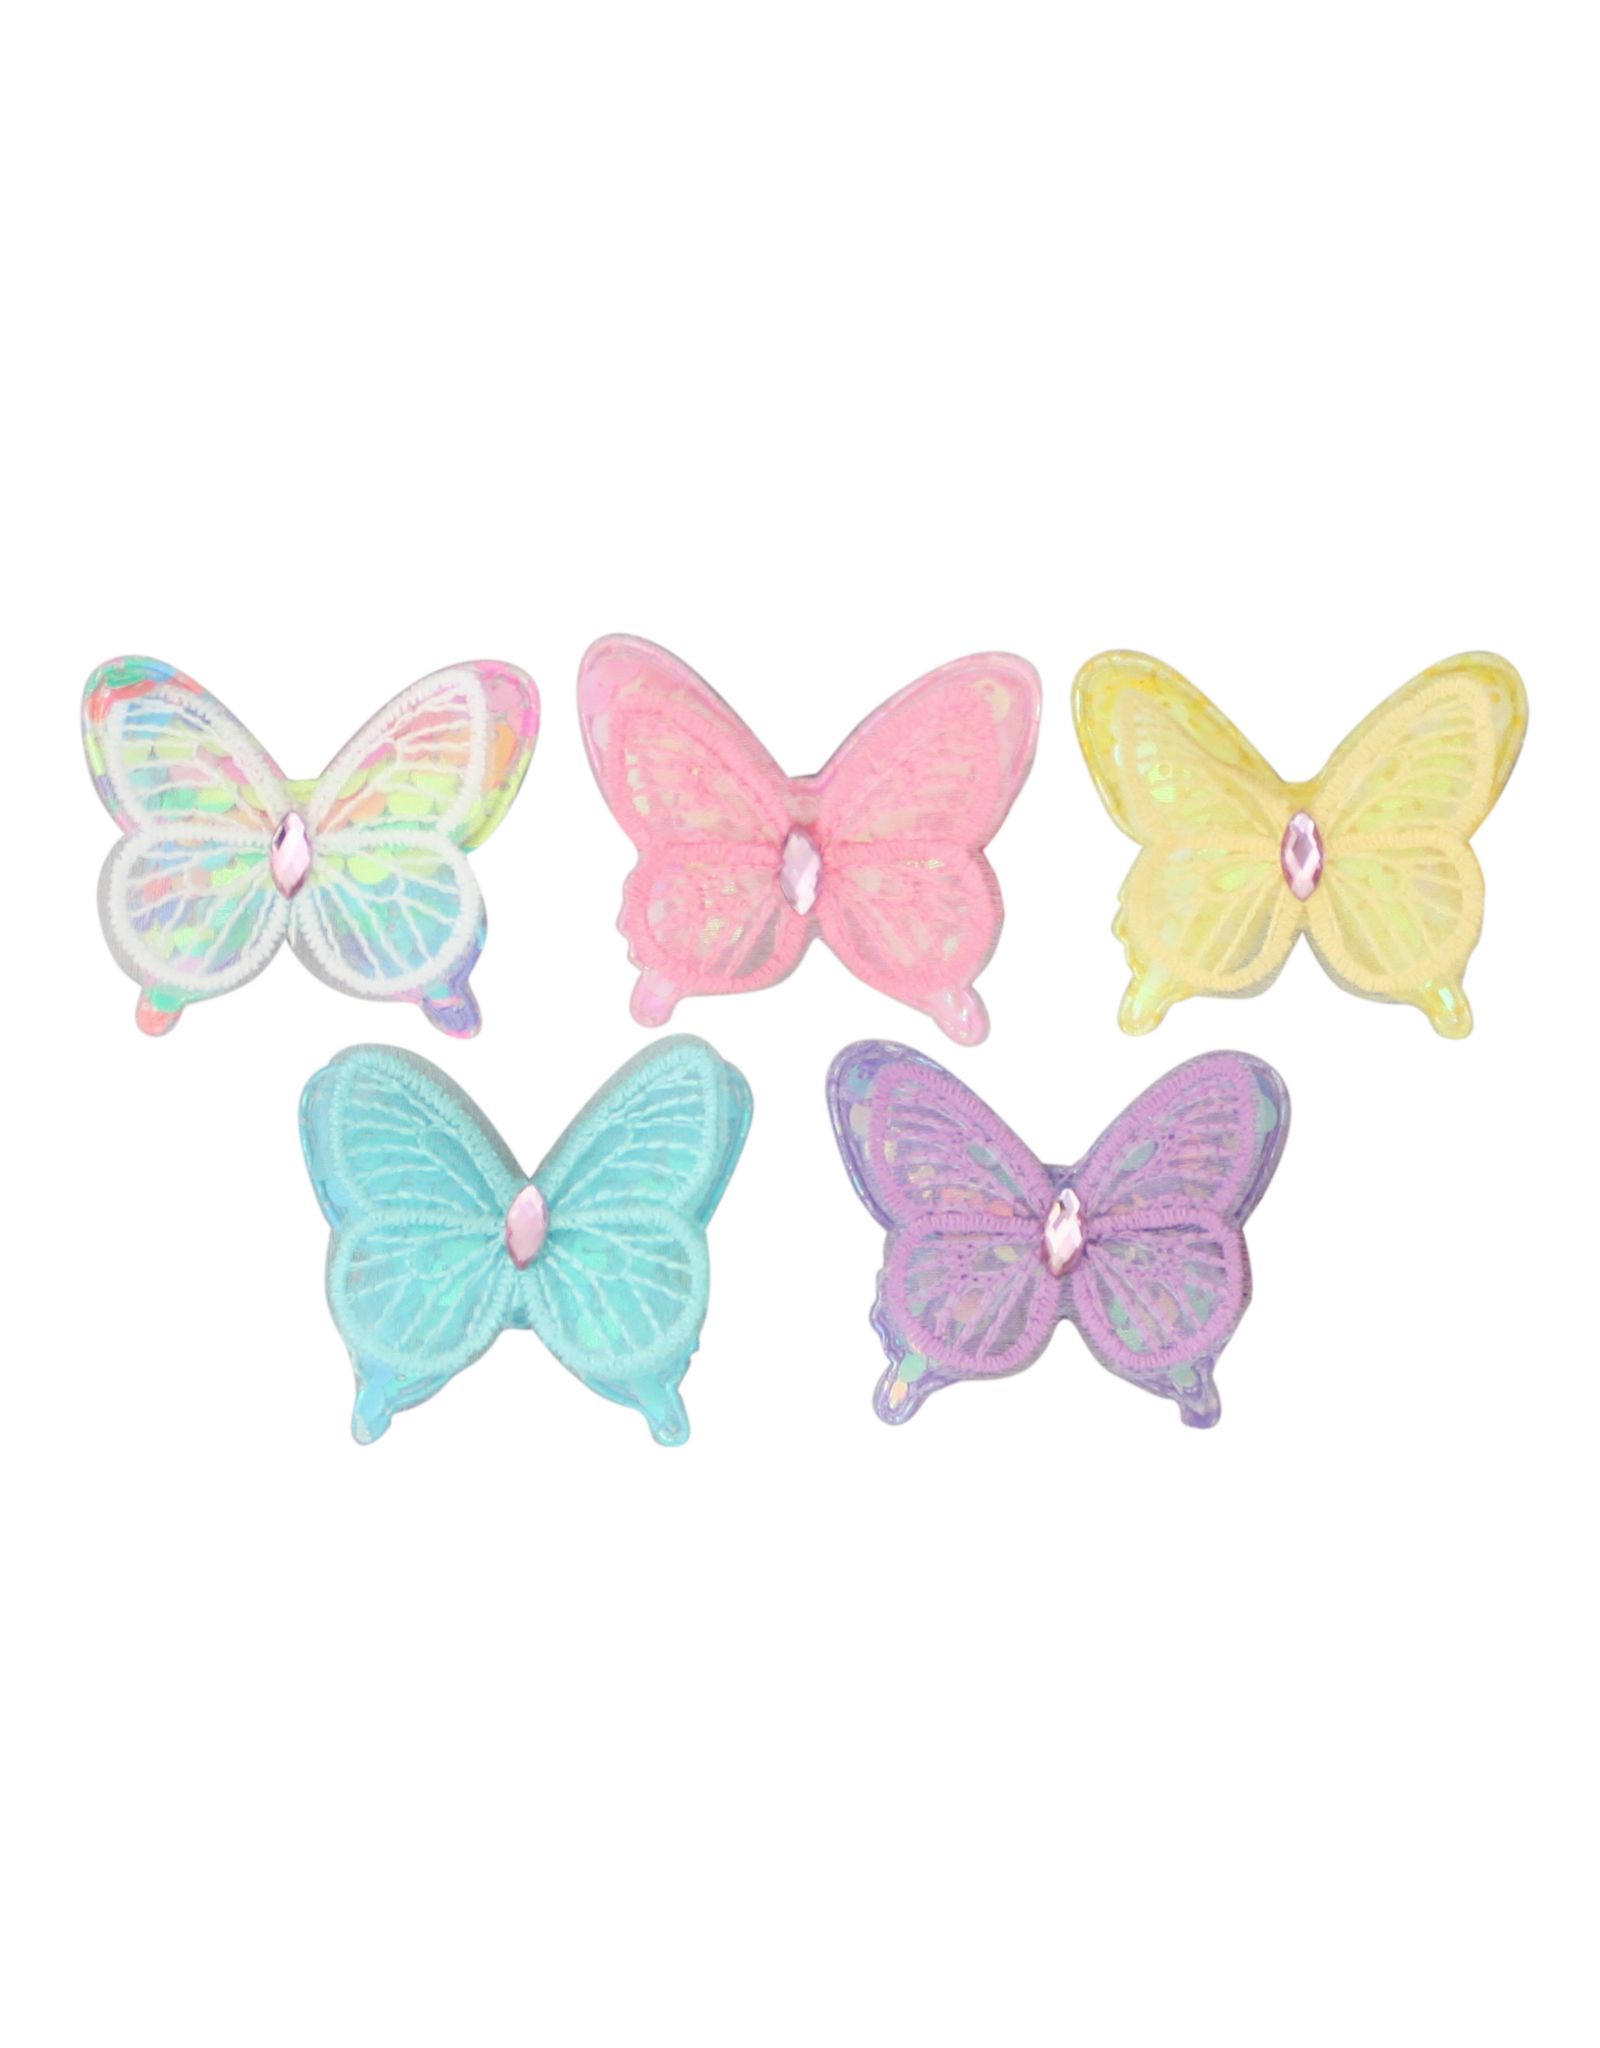 Bows Arts Sequin Pastel Butterfly Clips